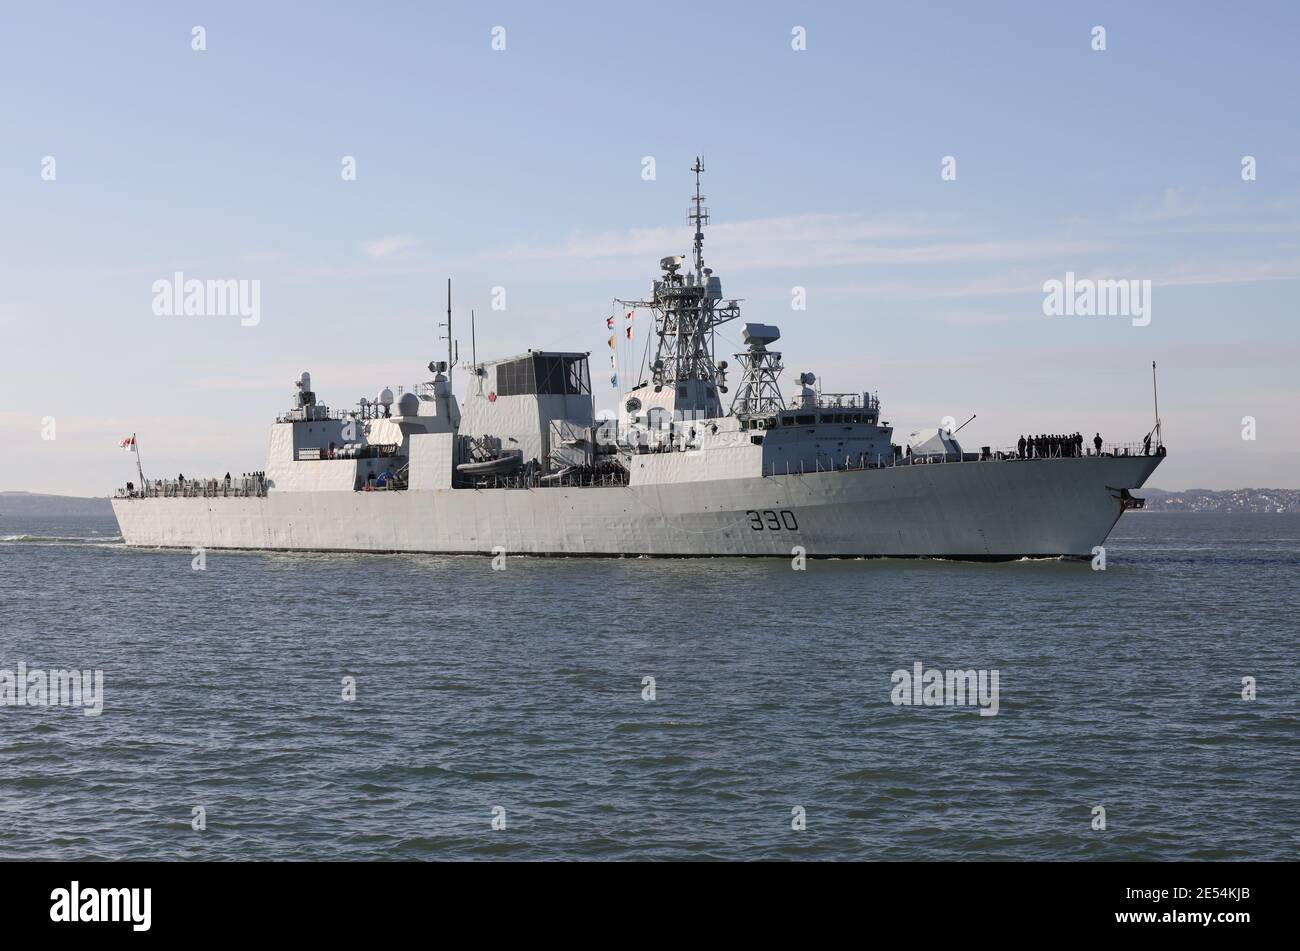 The Royal Canadian Navy frigate HMCS HALIFAX (FFH330) approaches the harbour entrance Stock Photo